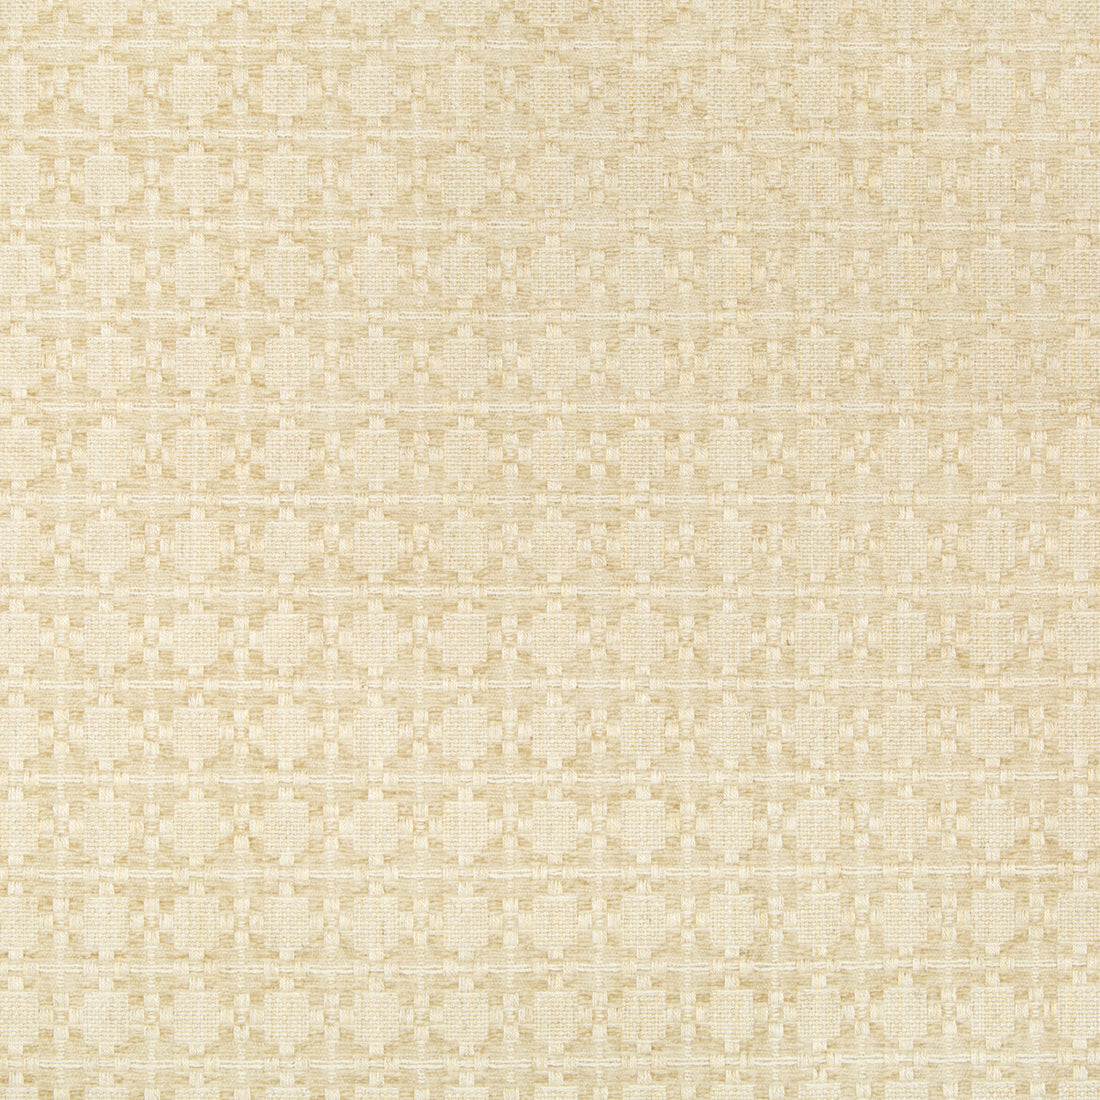 Back In Style fabric in natural color - pattern 34962.116.0 - by Kravet Couture in the Modern Tailor collection